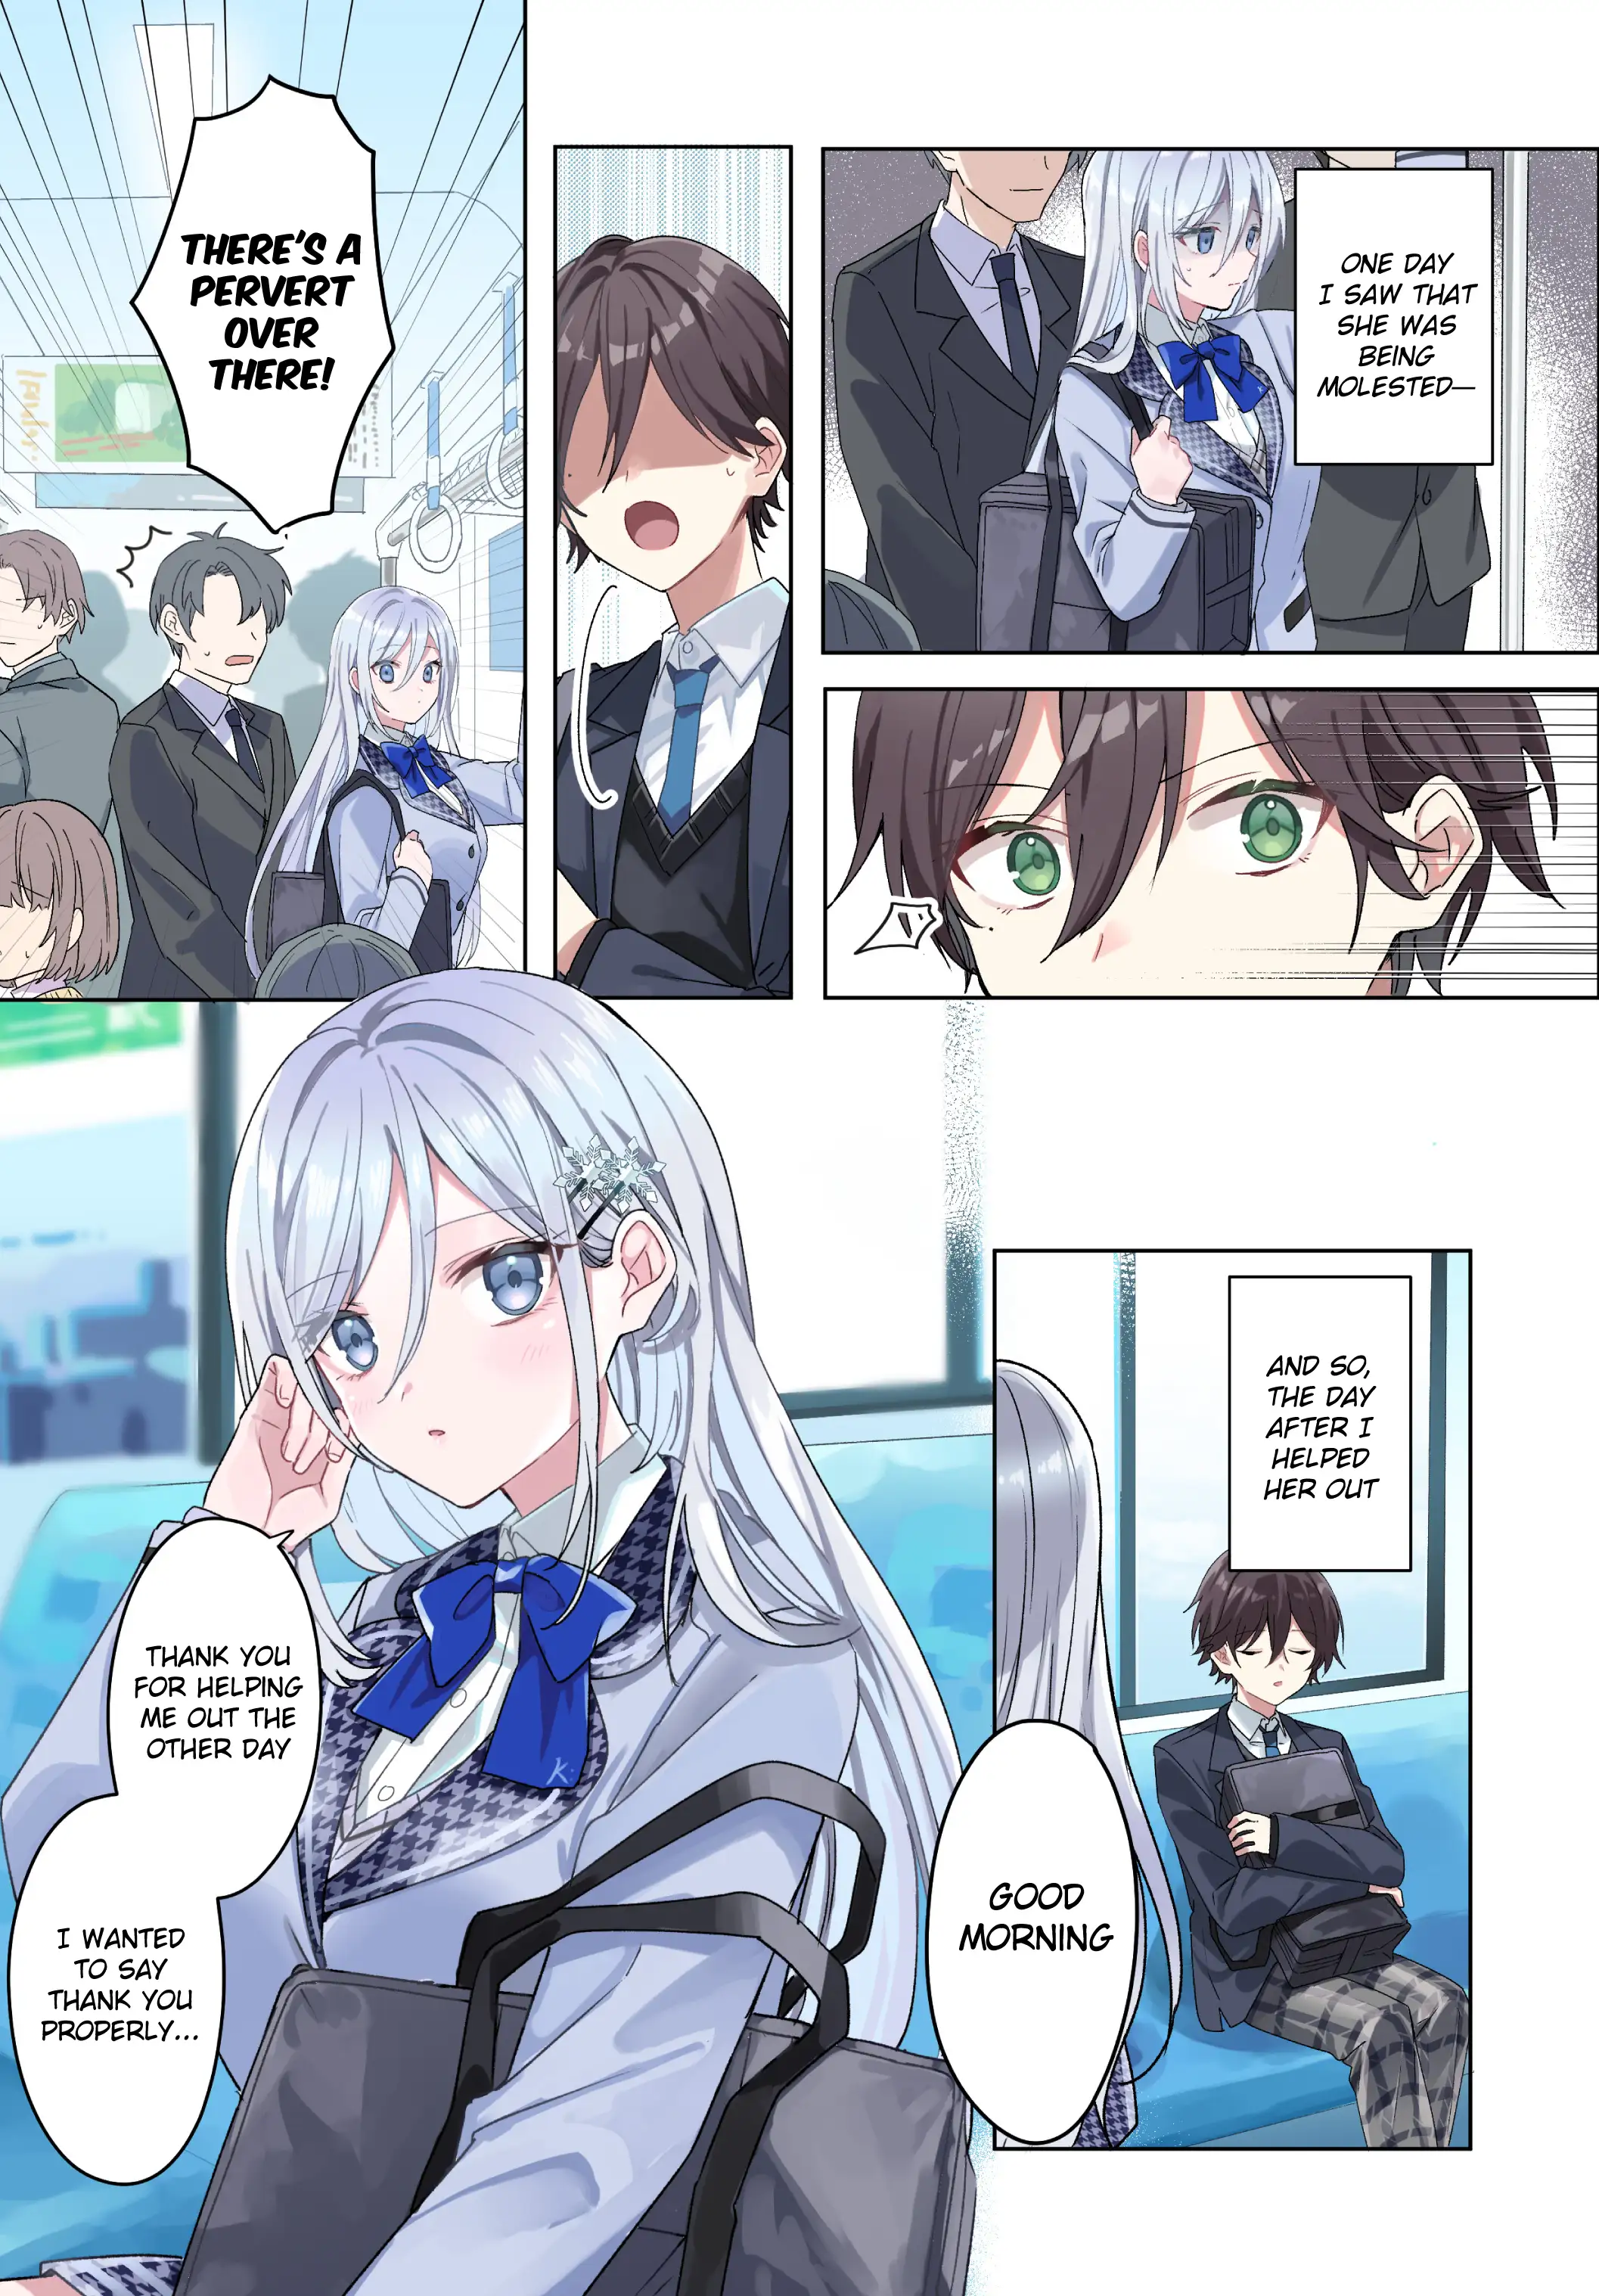 After I Save The Ice Princess From Another School From a Mol*ster, We Started as Friends - chapter 0 - #3